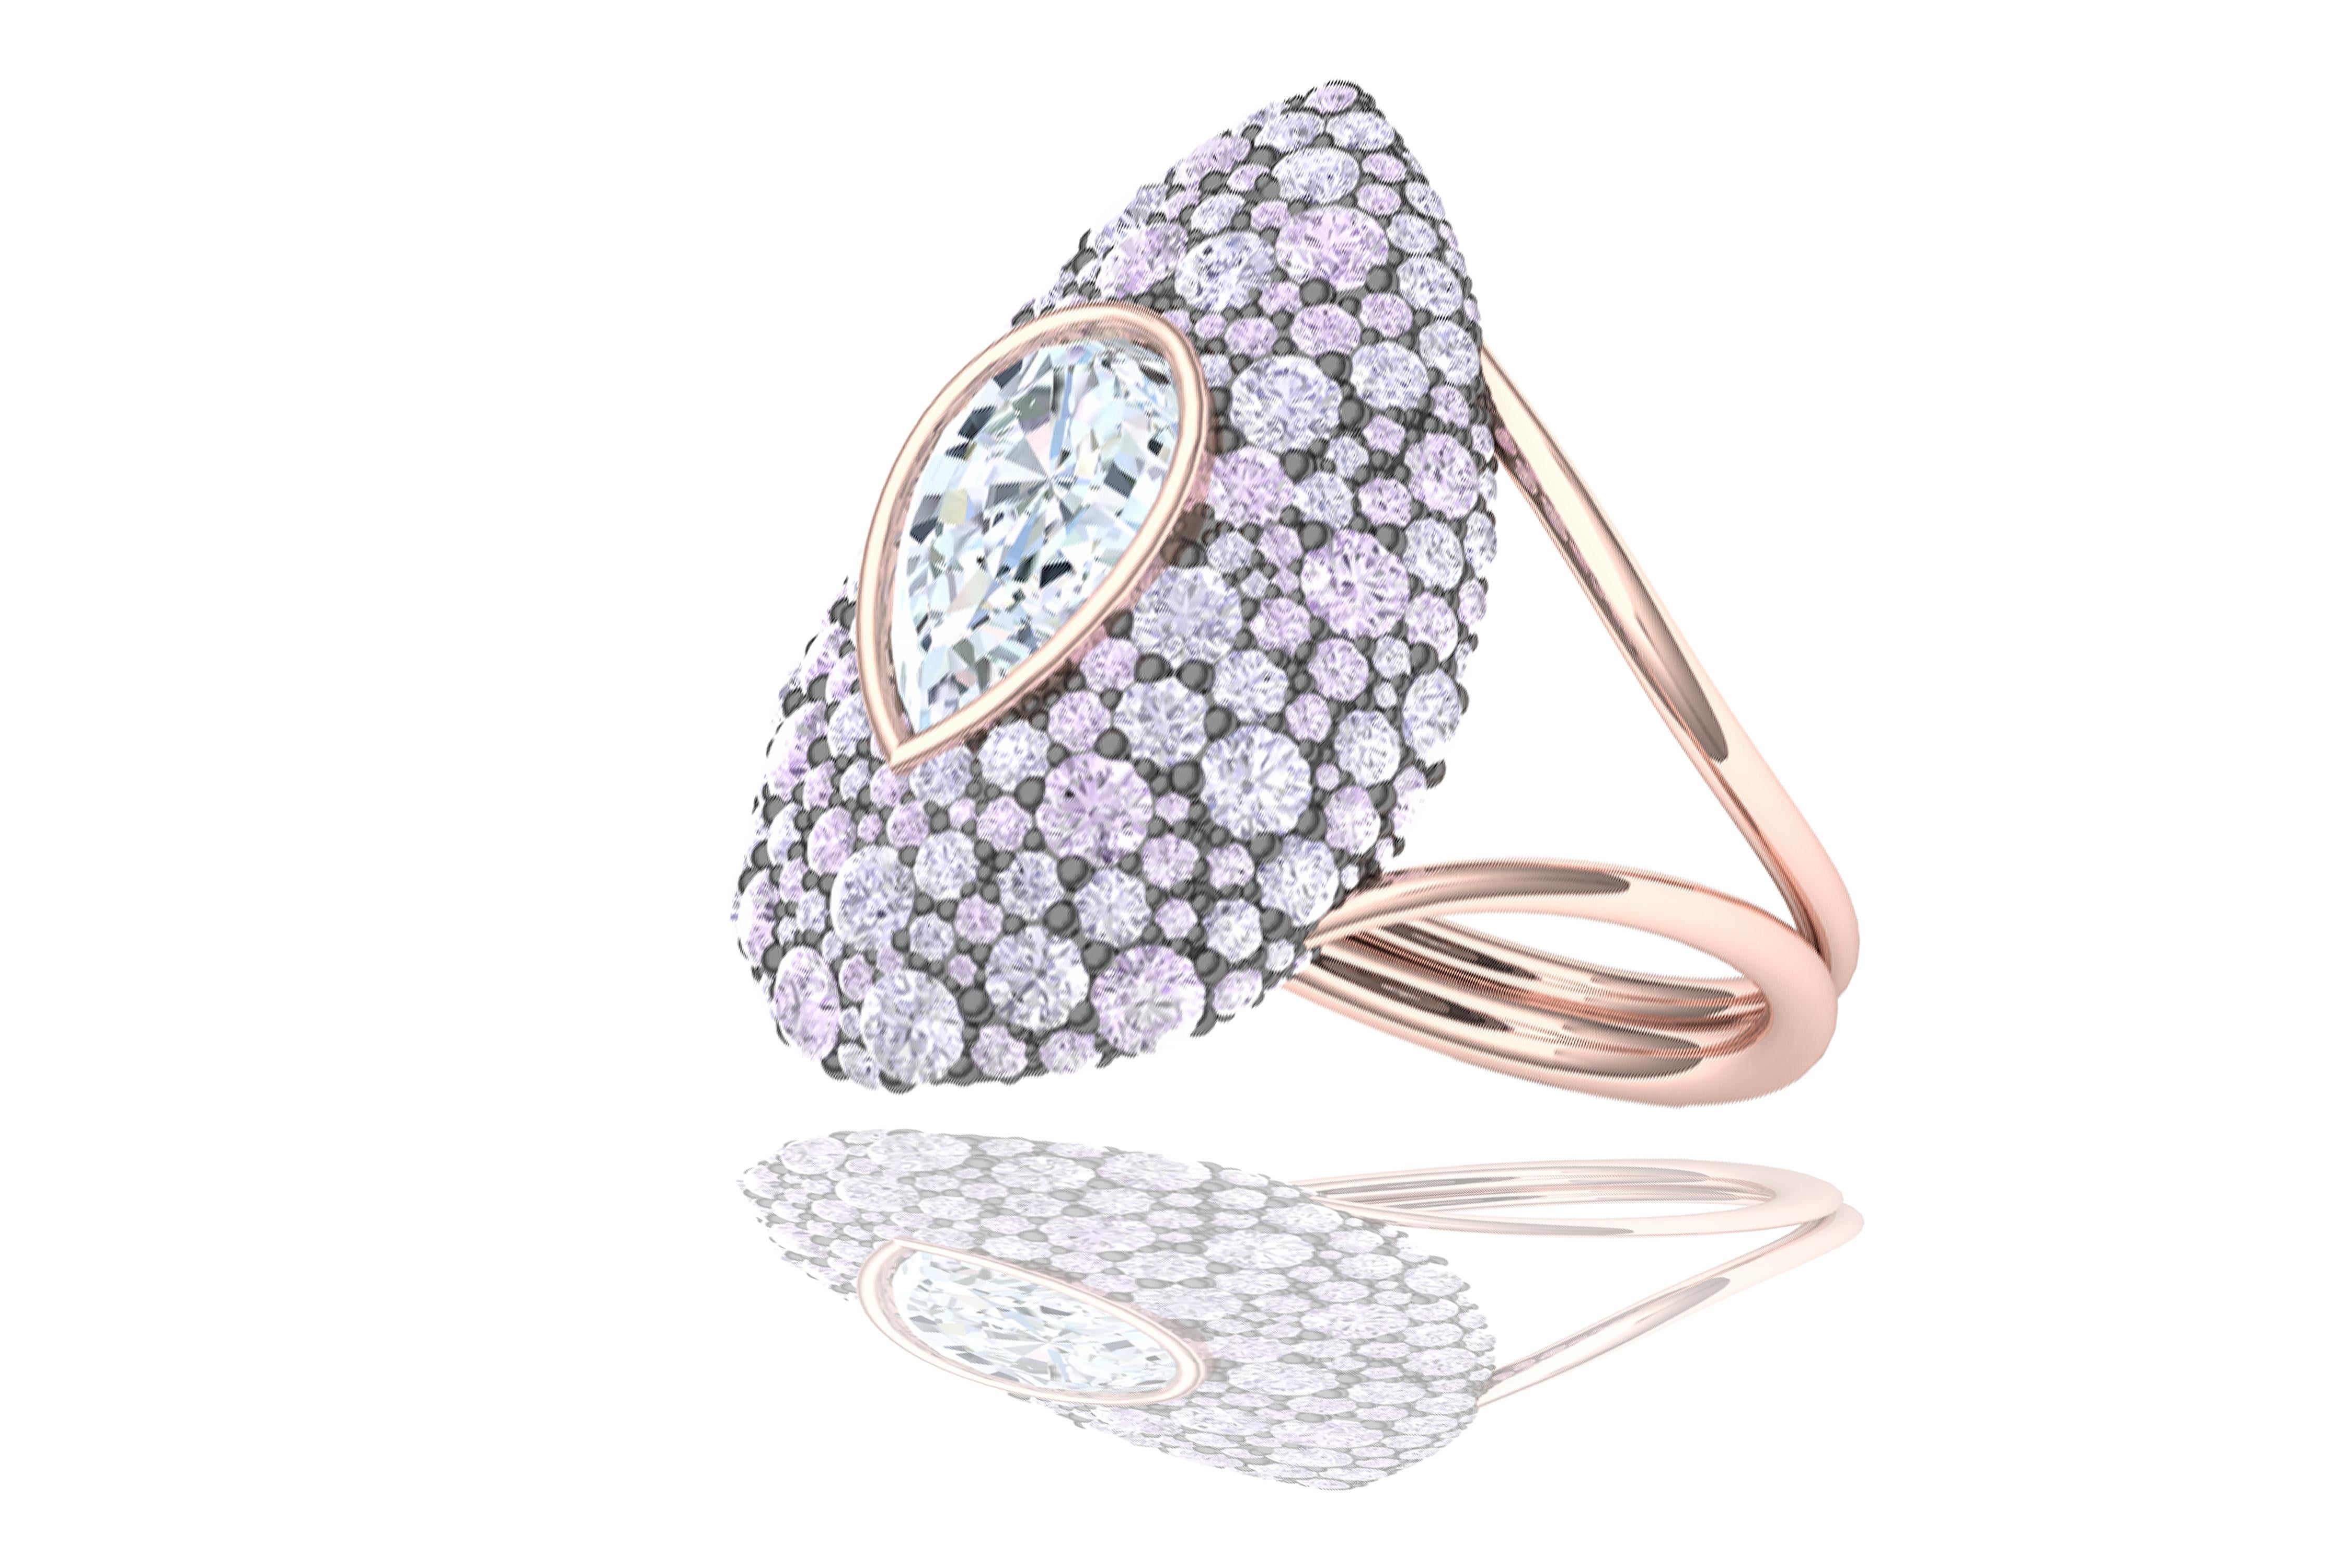 A stunning modern display of pairing pastel lavender with the warmth of rose gold and white diamond.  The center stone is a 1 carat pear shape G-SI diamond bezel set in 18k rose gold.  The center is surrounded by an array of beautiful purple